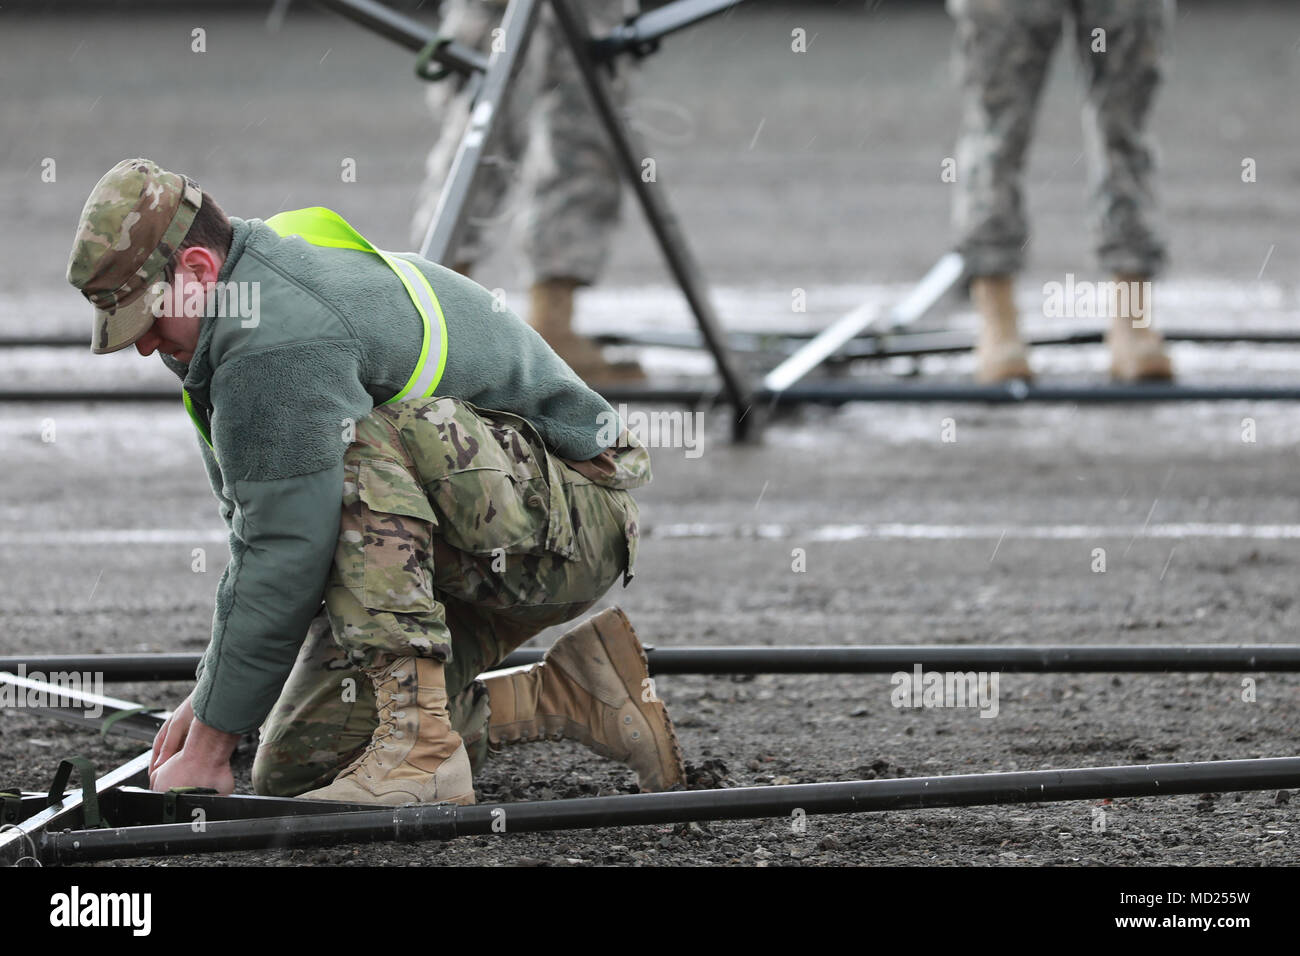 A U.S. Army Reserve Soldier constructs a mobile maintenance tent during Operation Patriot Bandolier at Military Ocean Terminal Concord, California, Mar. 2, 2018. Operation Patriot Bandolier is a real-world strategic mission utilizing U.S. Army Reserve, National Guard and Active component Soldiers transport Army materiel and munitions containers across the U.S.     (U.S. Army photo by Sgt. Eben Boothby) Stock Photo